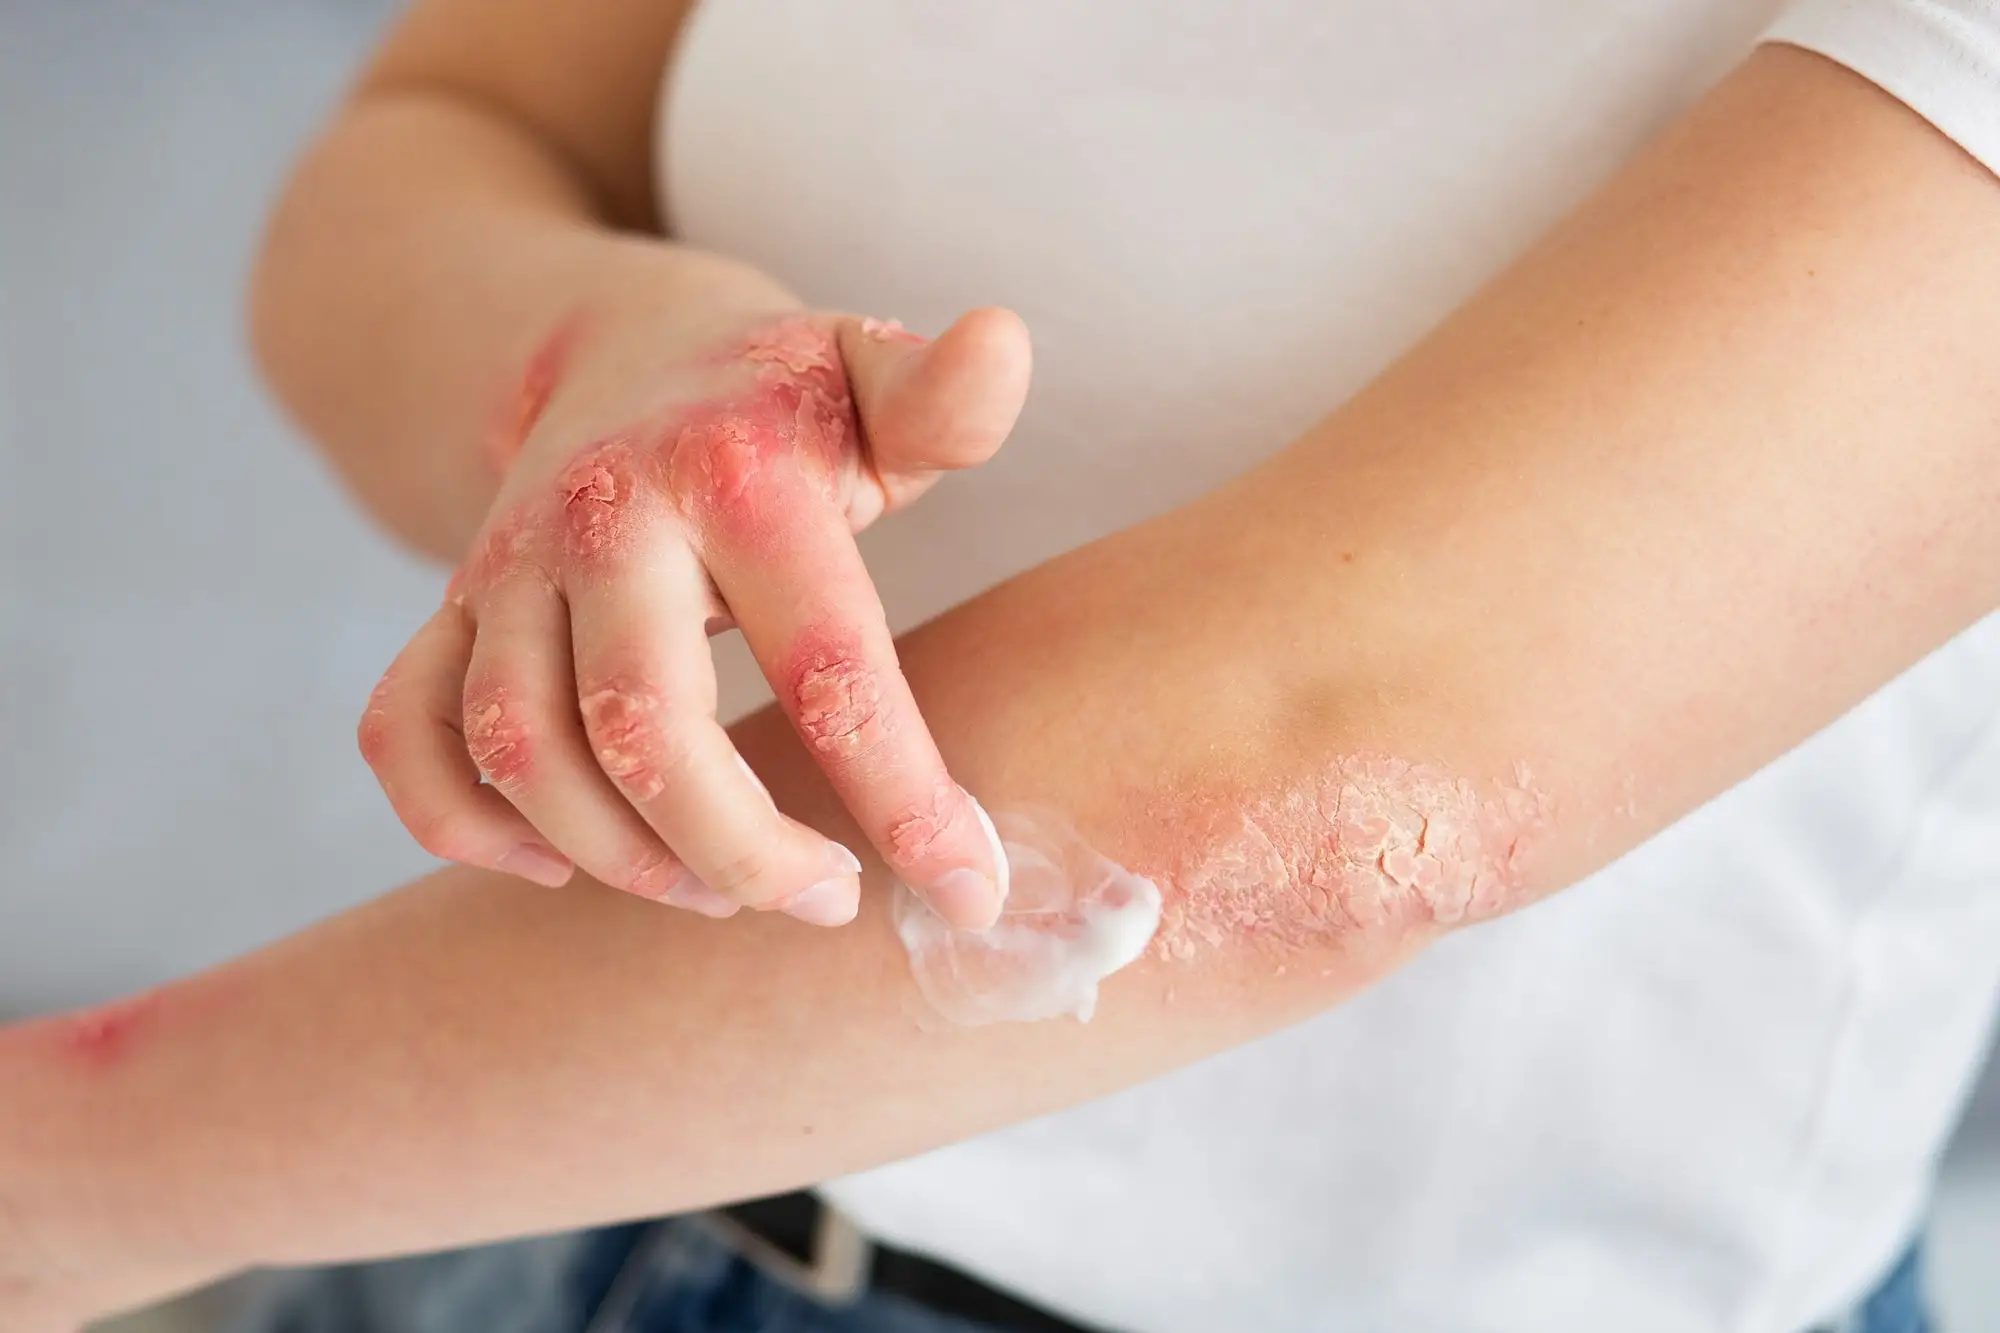 patient suffering from eczema dermatitis applying ointment